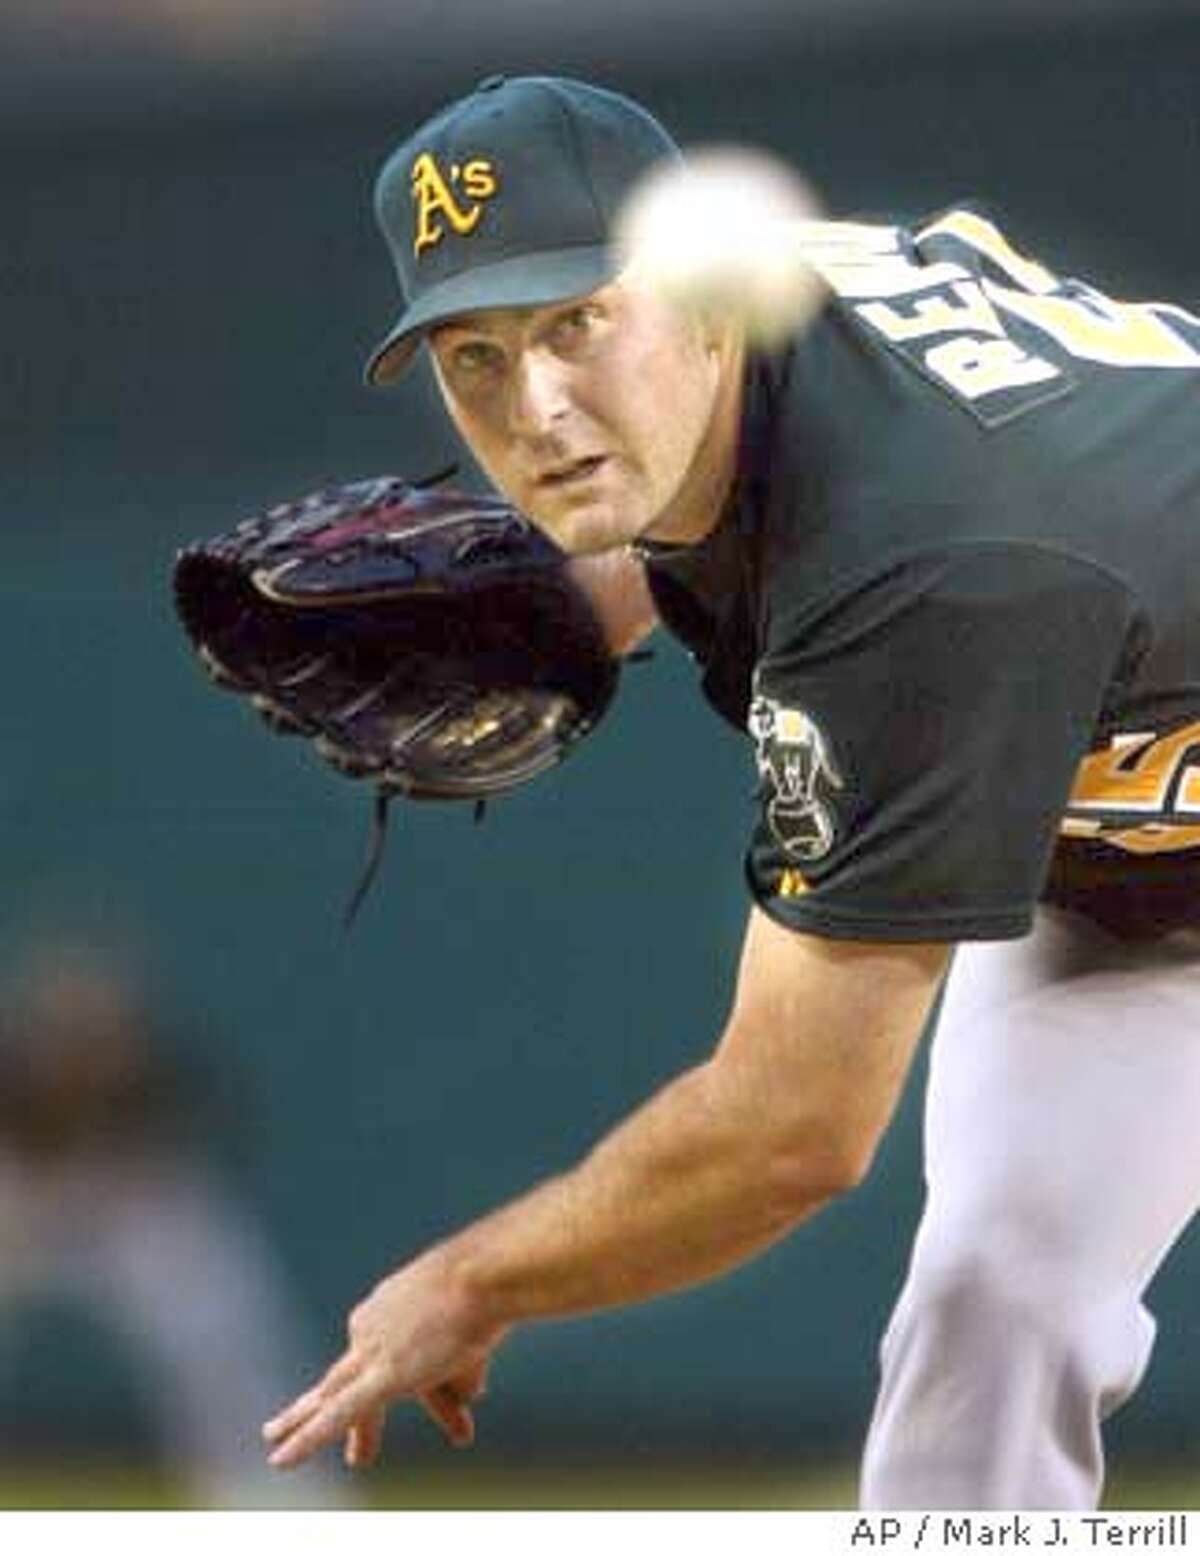 Oakland Athletics pitcher Mark Redman throws to the plate during the first inning against the Anaheim Angels, Wednesday night, June 23, 2004, in Anaheim, Calif. (AP Photo/Mark J. Terrill)